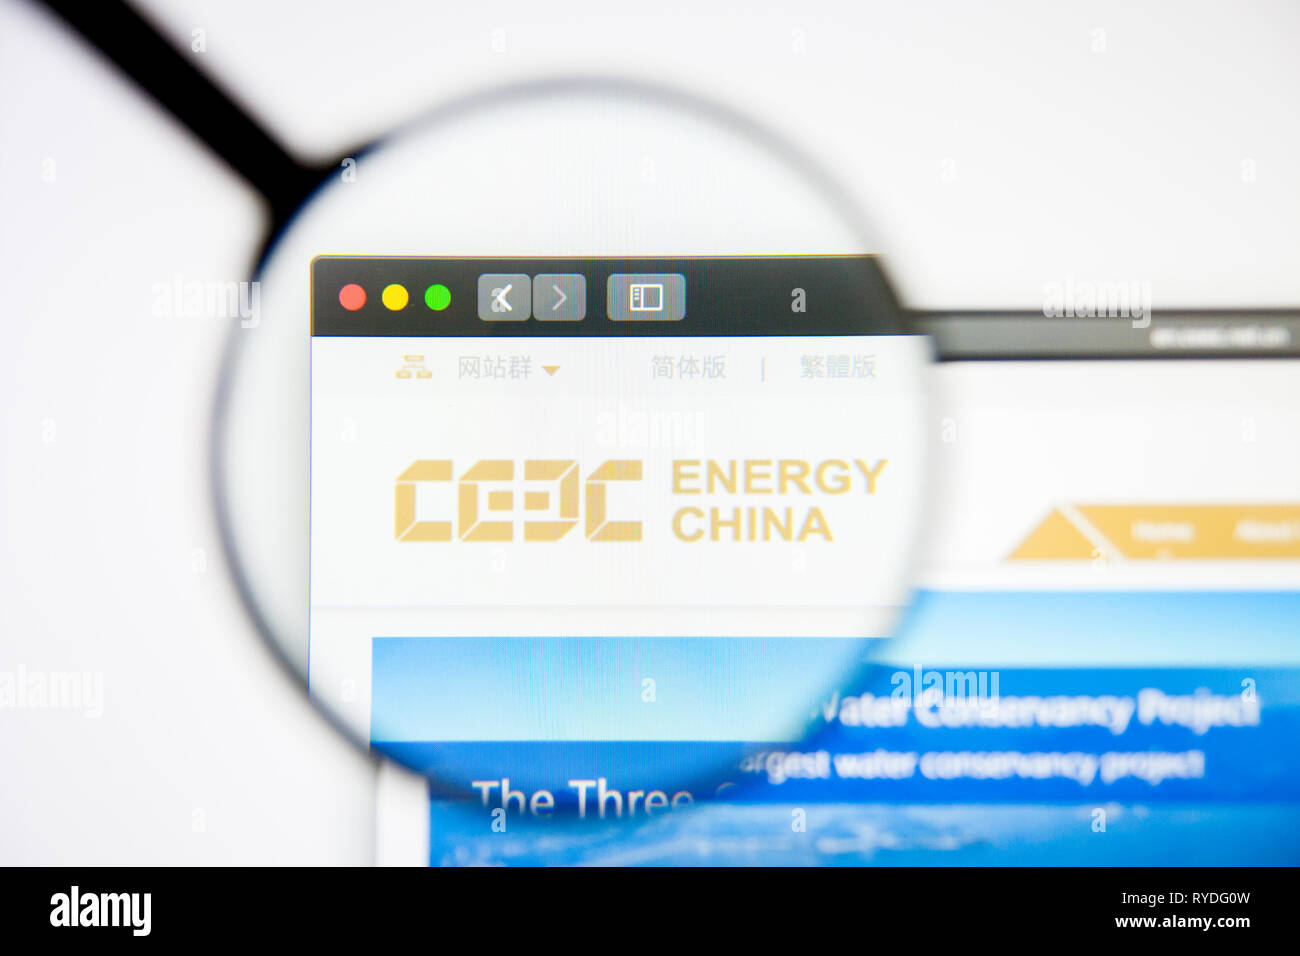 Los Angeles, California, USA - 5 March 2019: China Energy Engineering website homepage. China Energy Engineering logo visible on display screen Stock Photo